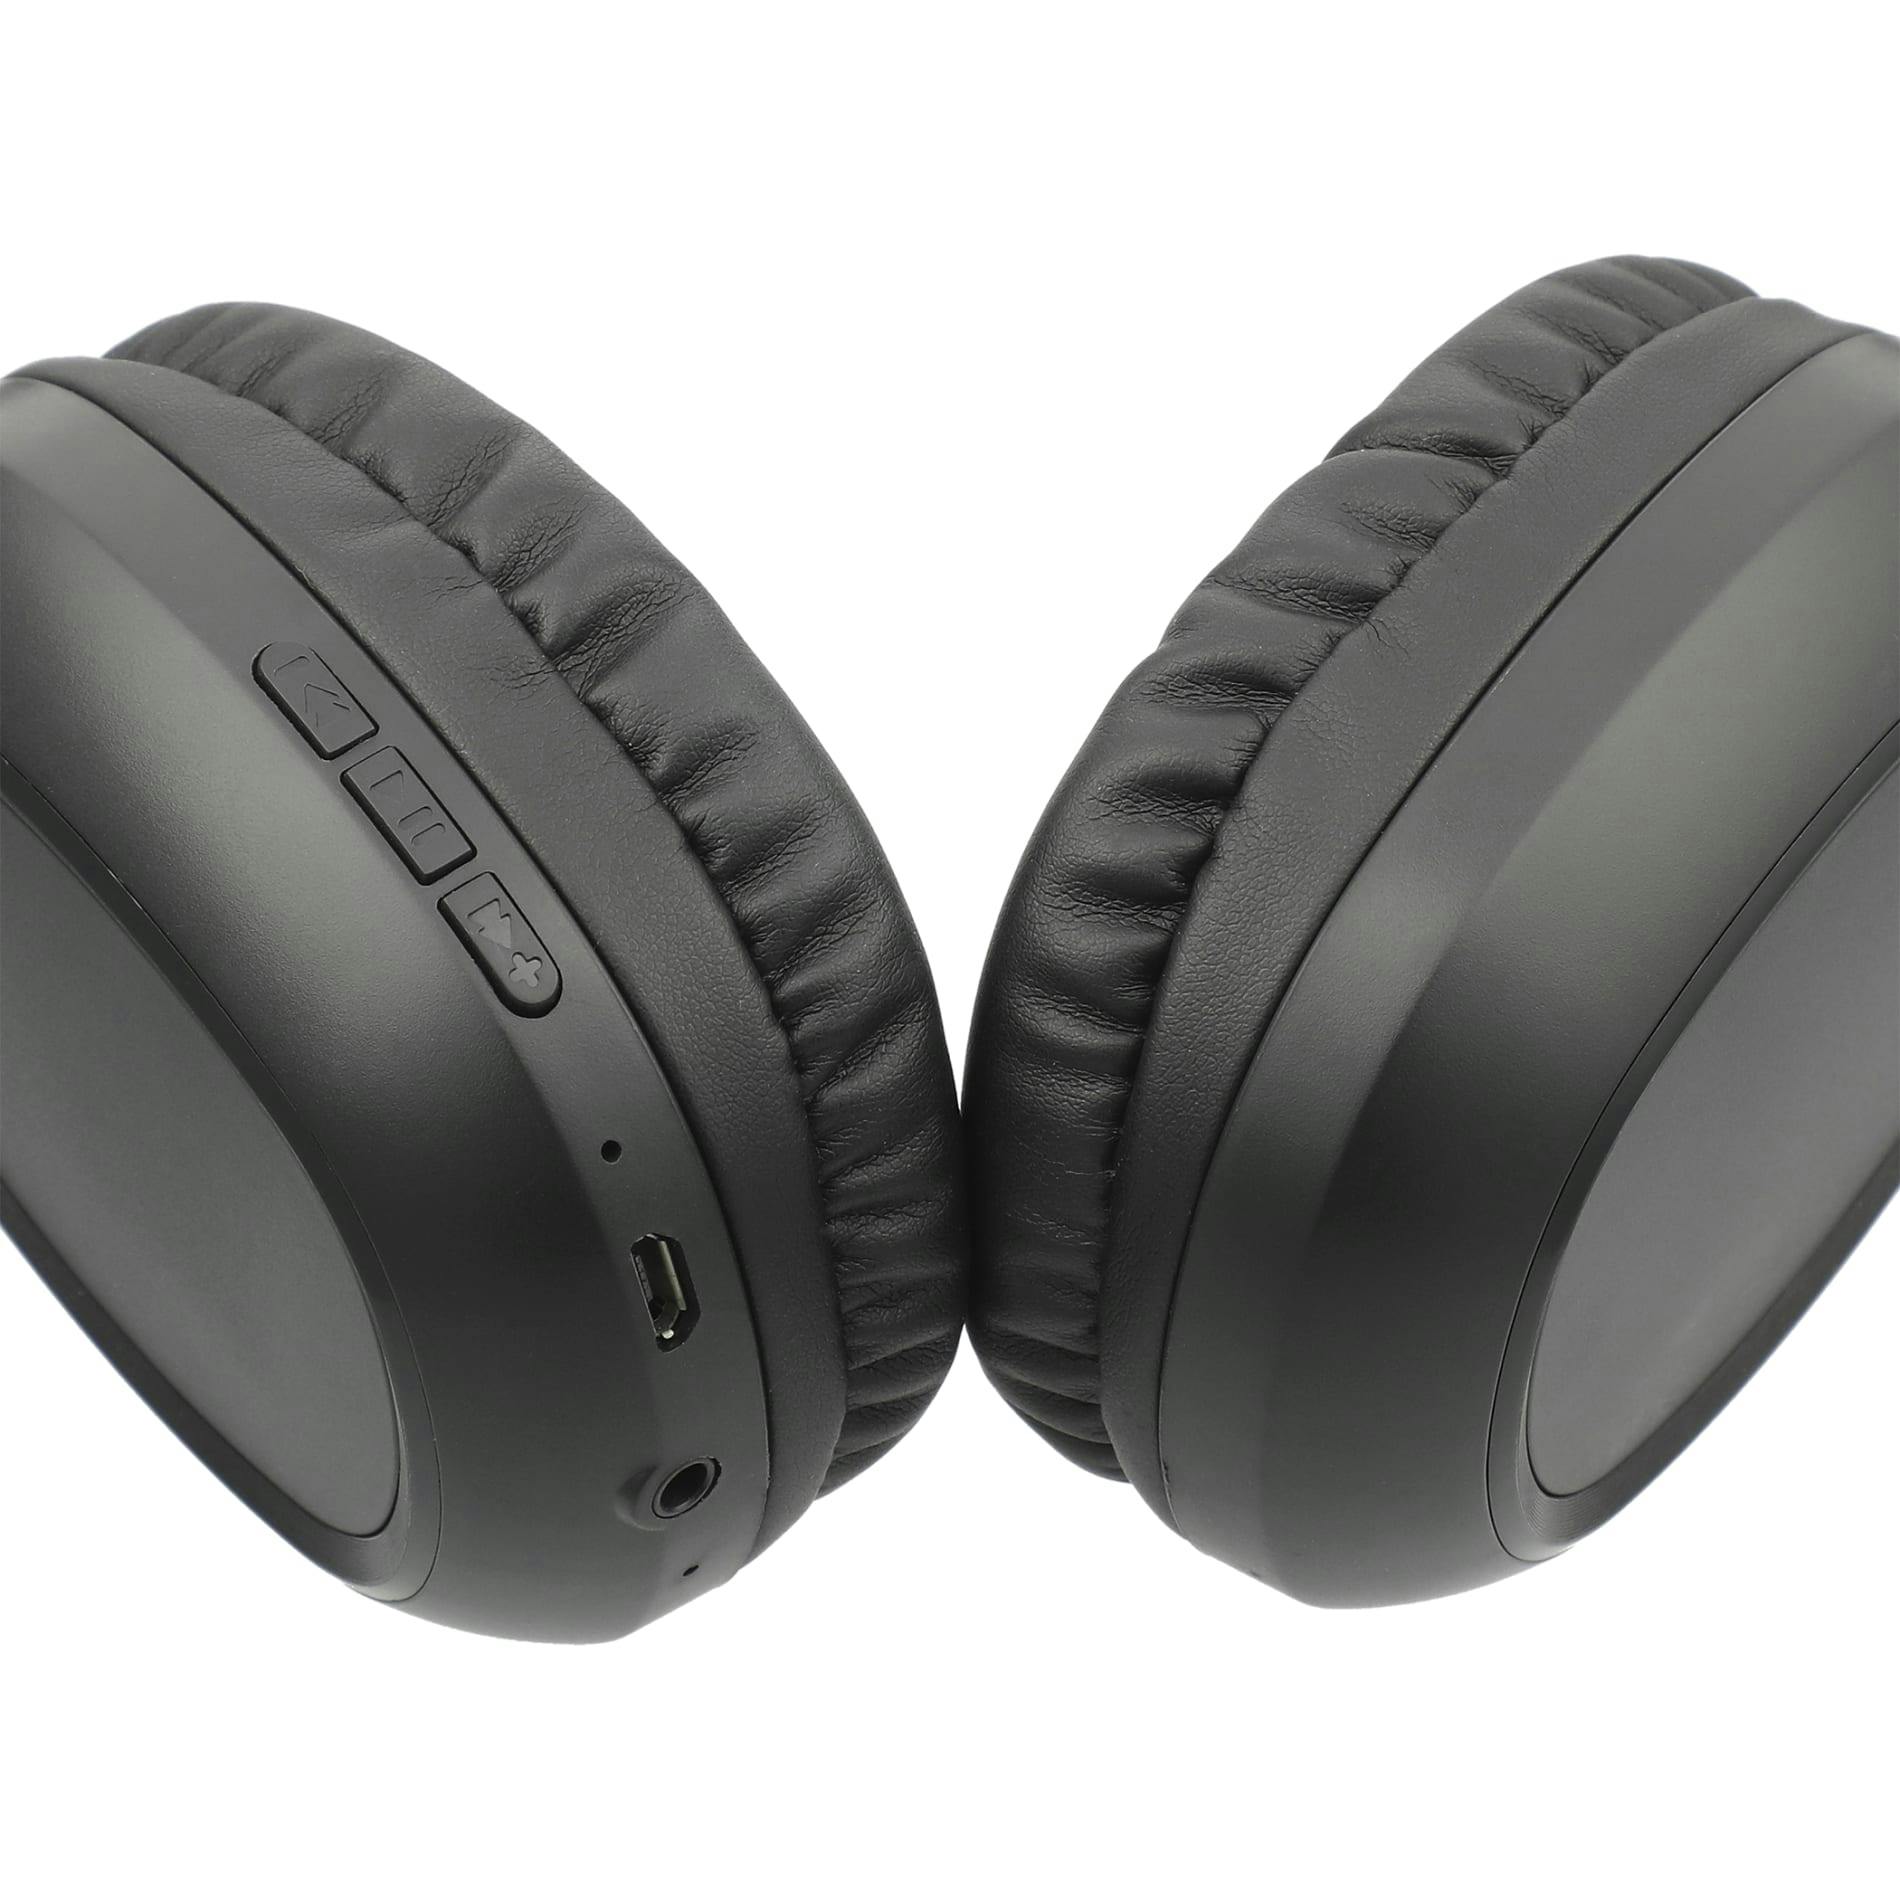 Oppo Bluetooth Headphones and Microphone - additional Image 2